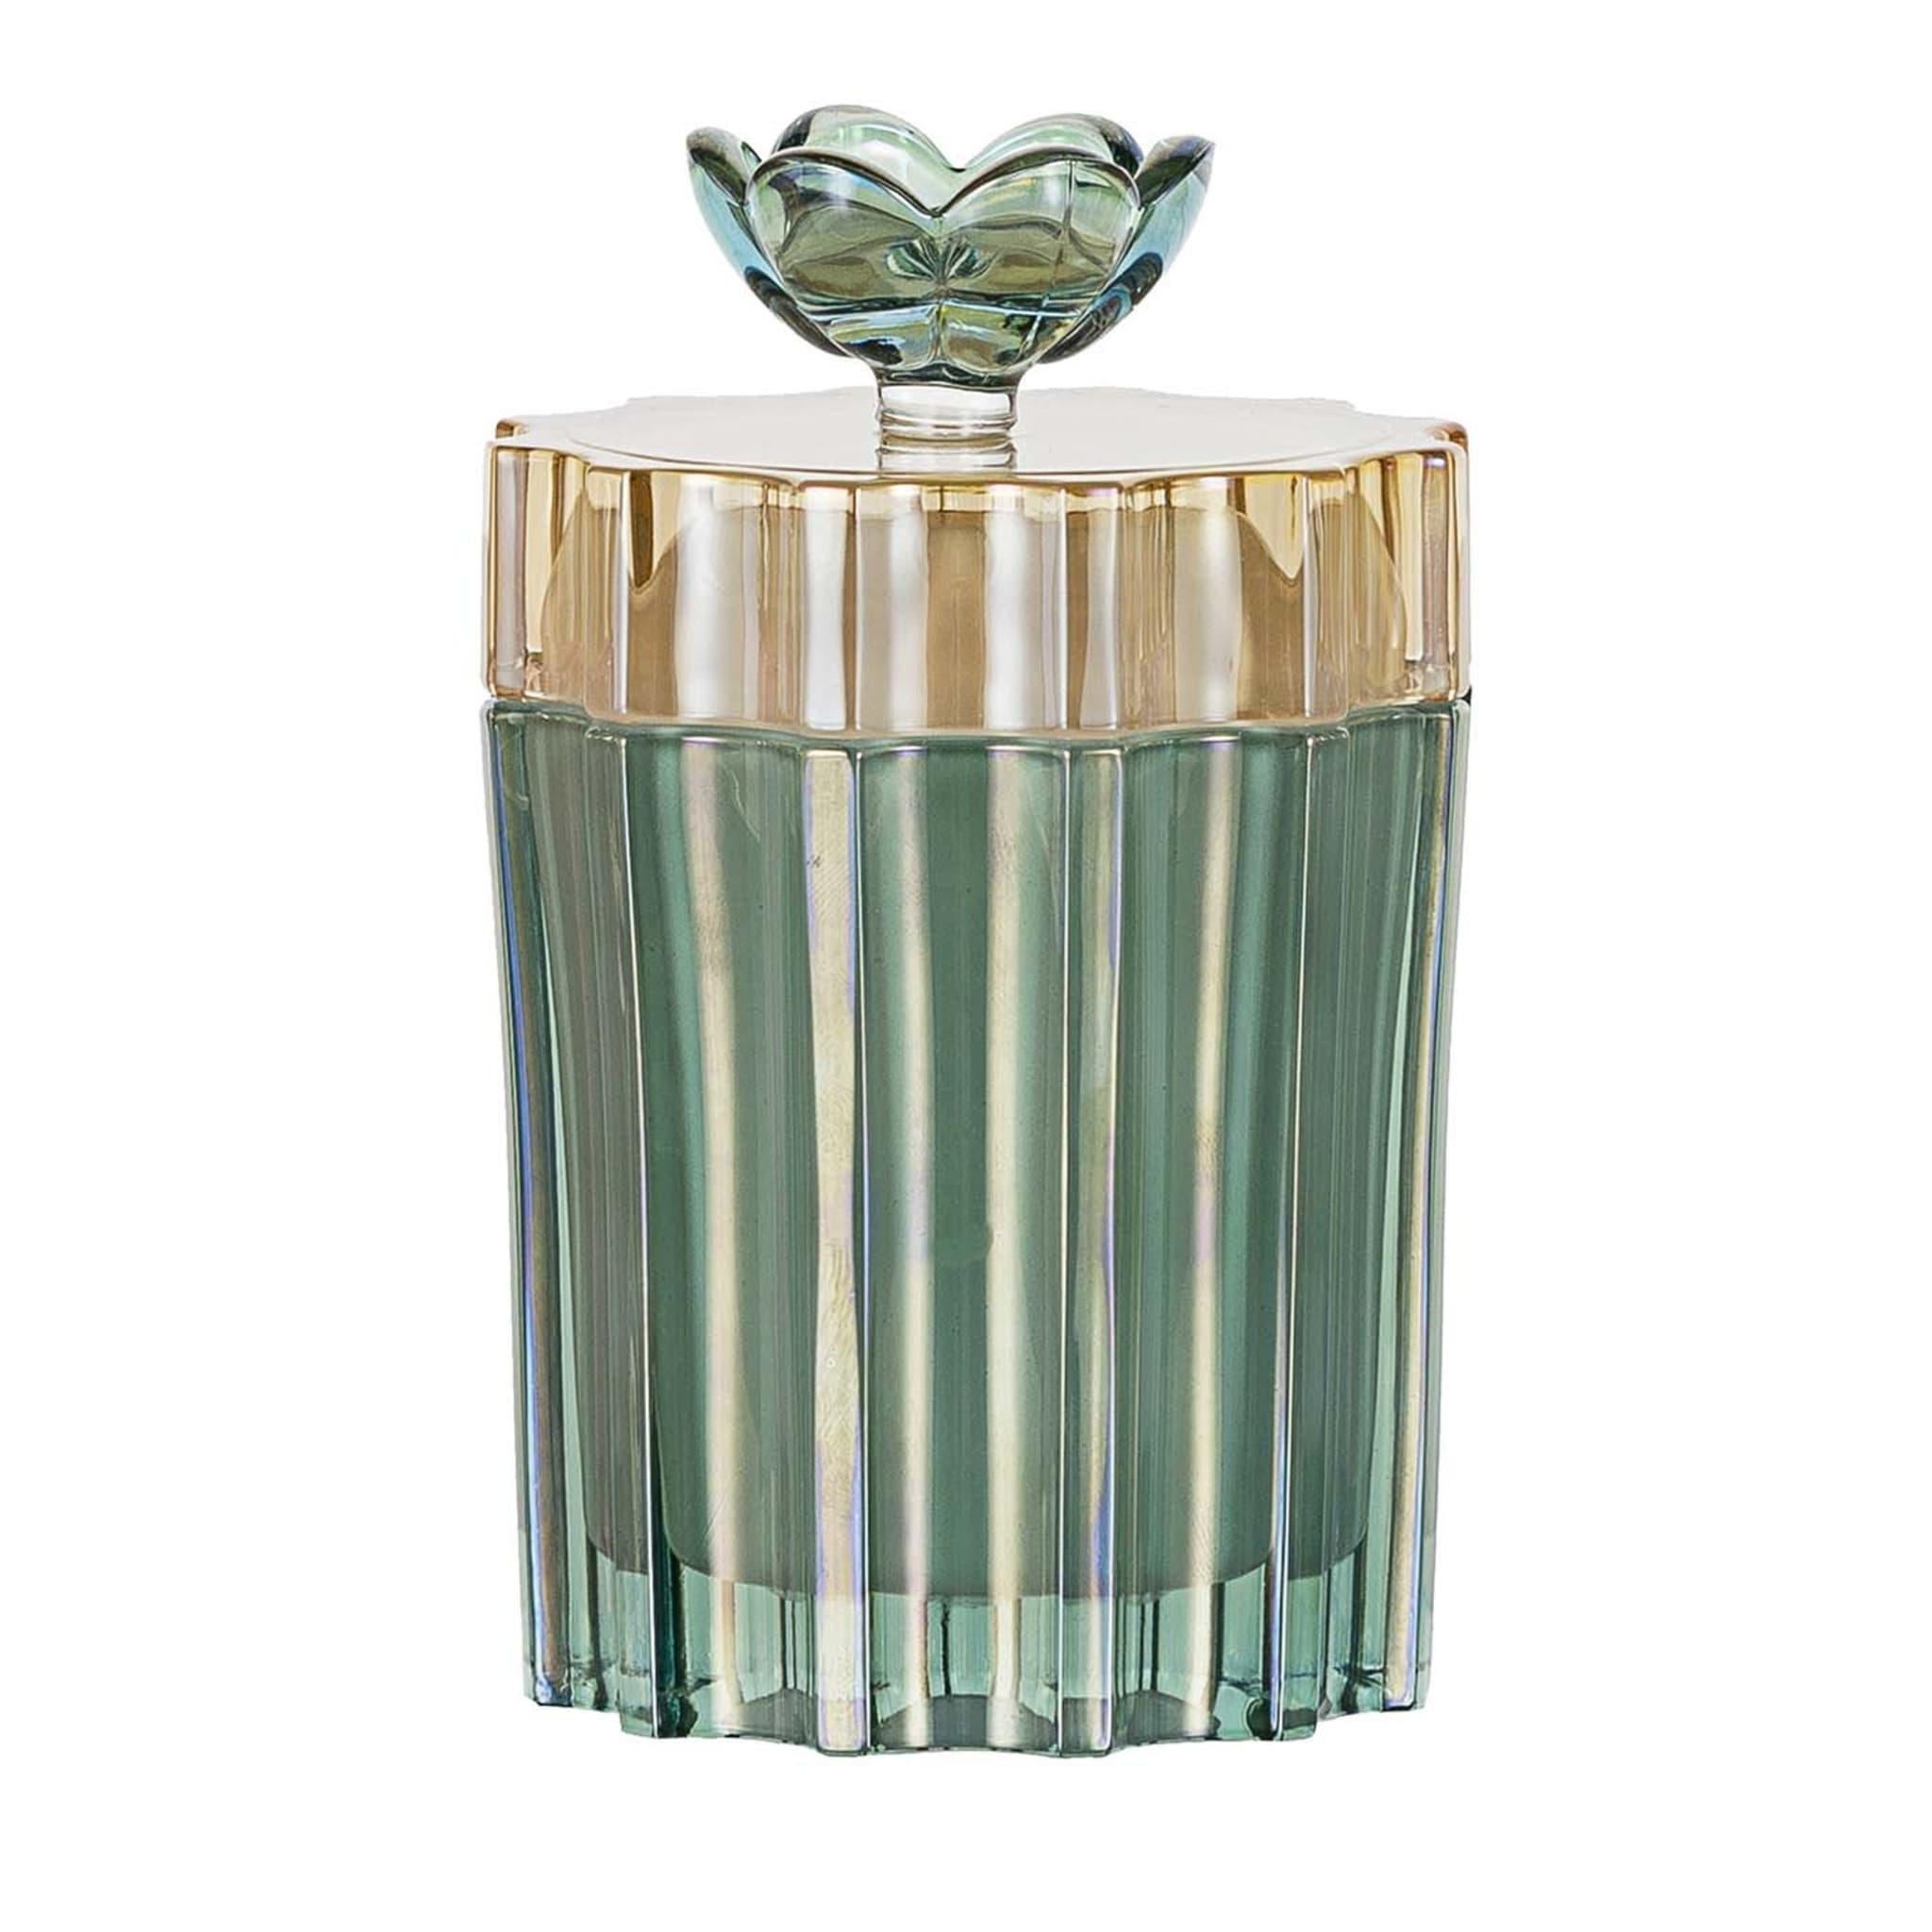 This glass box will add a colorful accent to any vanity table in a bedroom or powder room. Exquisitely decorated by hand, it is distinguished by a vertically etched pattern that creates a mesmerizing interplay of reflections on the green glass